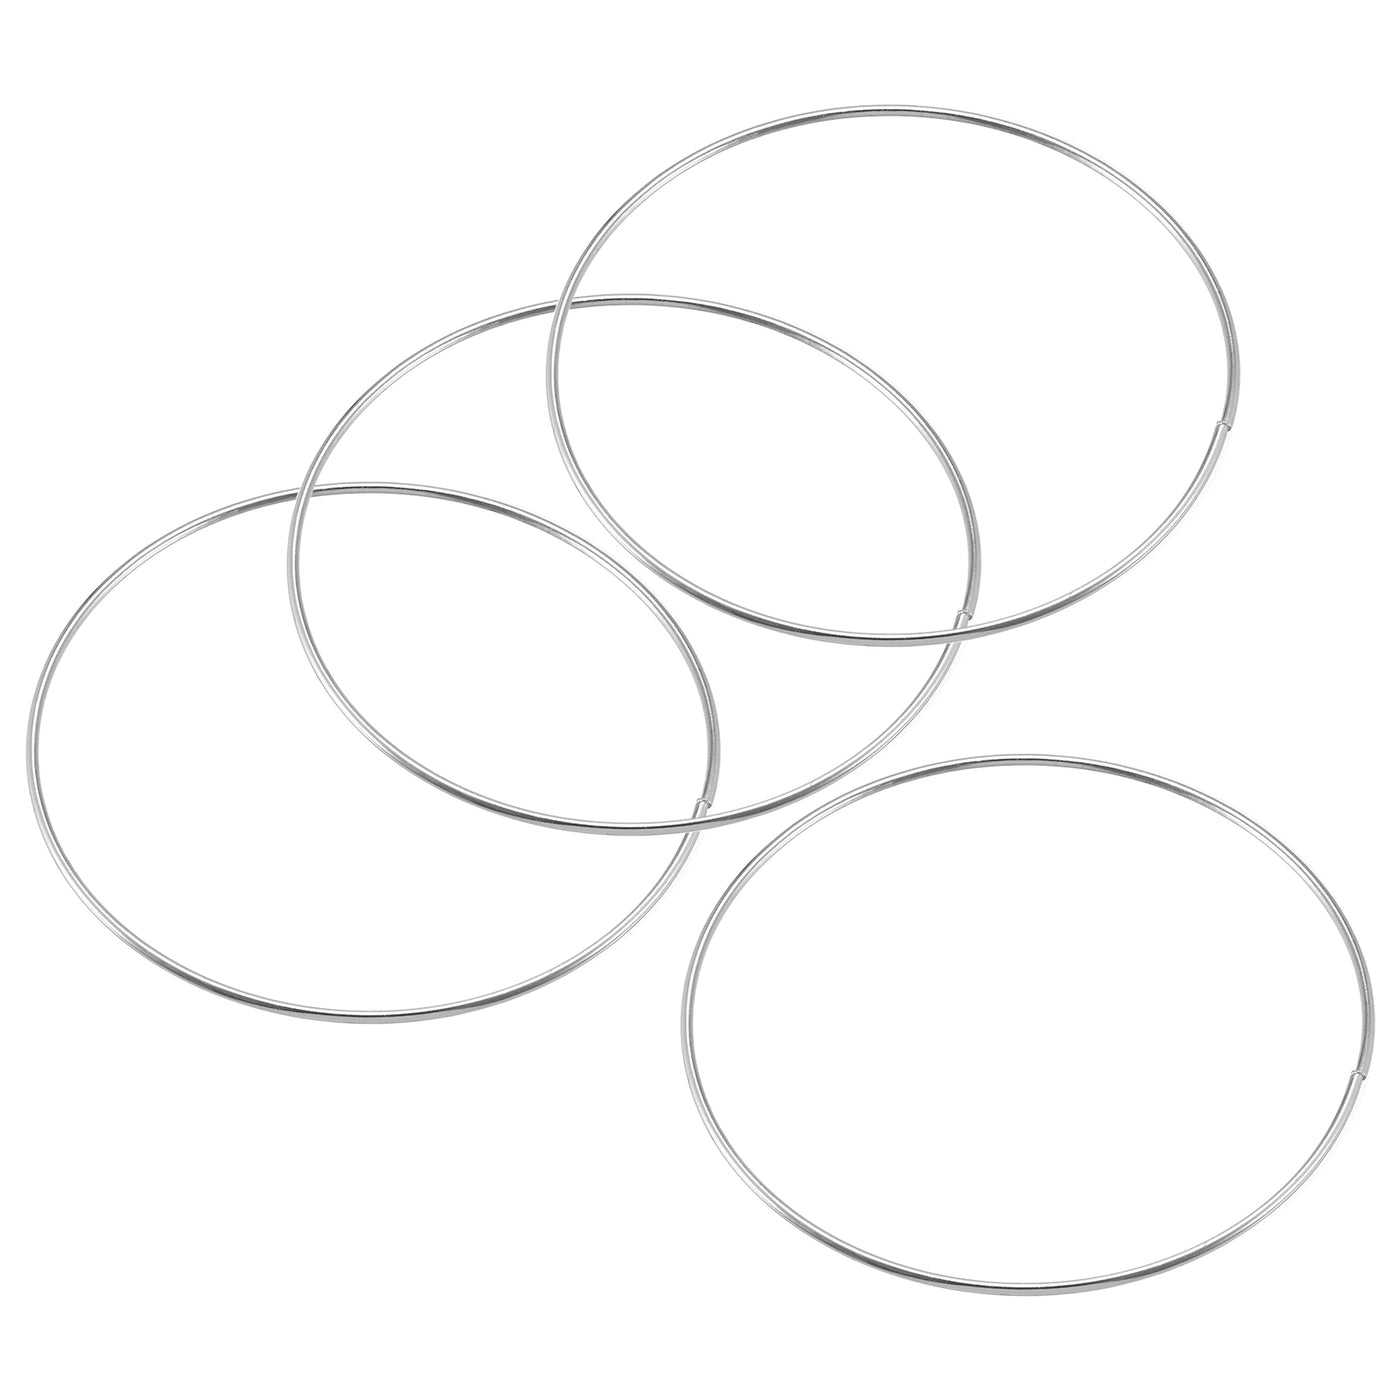 uxcell Uxcell 140mm(5.51") OD Metal O Ring Non-Welded Craft Hoops for DIY Silver Tone 4pcs